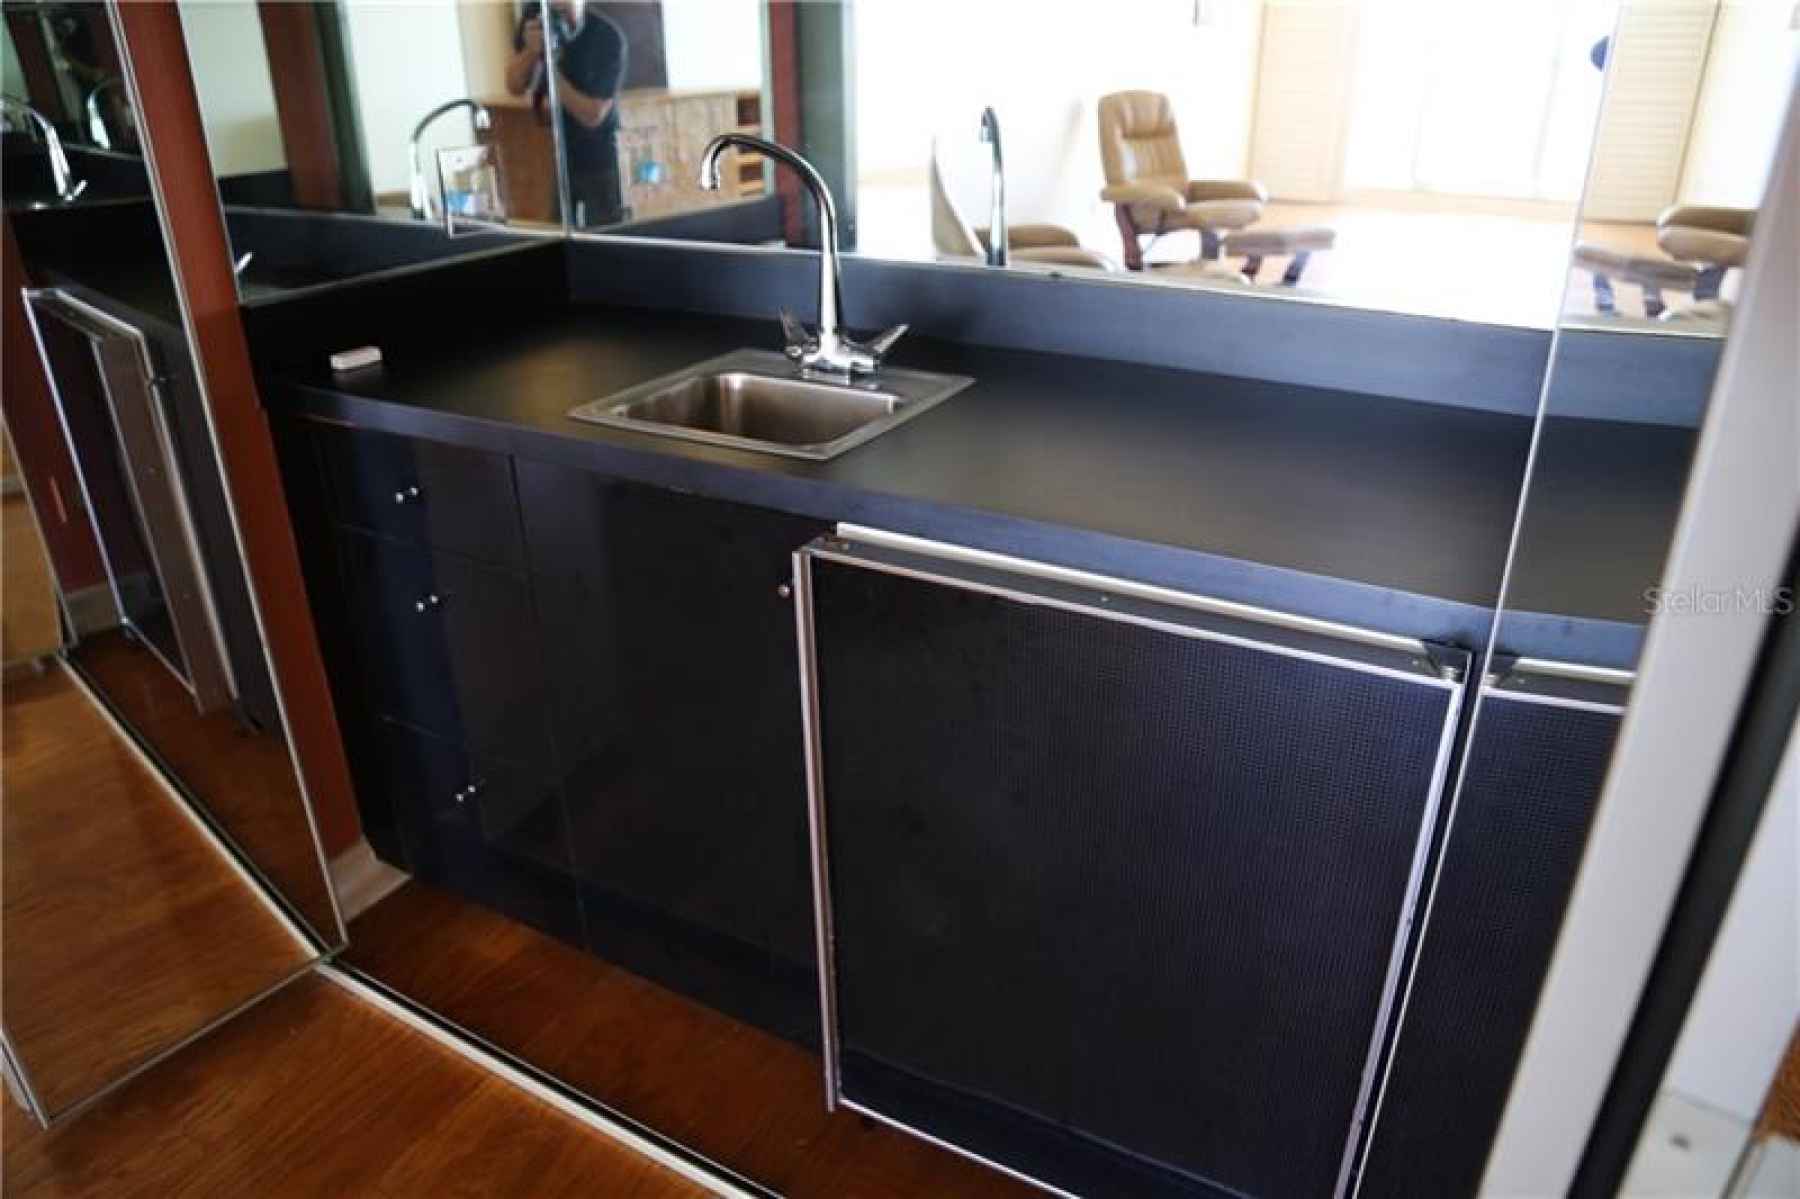 You can see the reflection of the views from this Wet Bar in the Living room